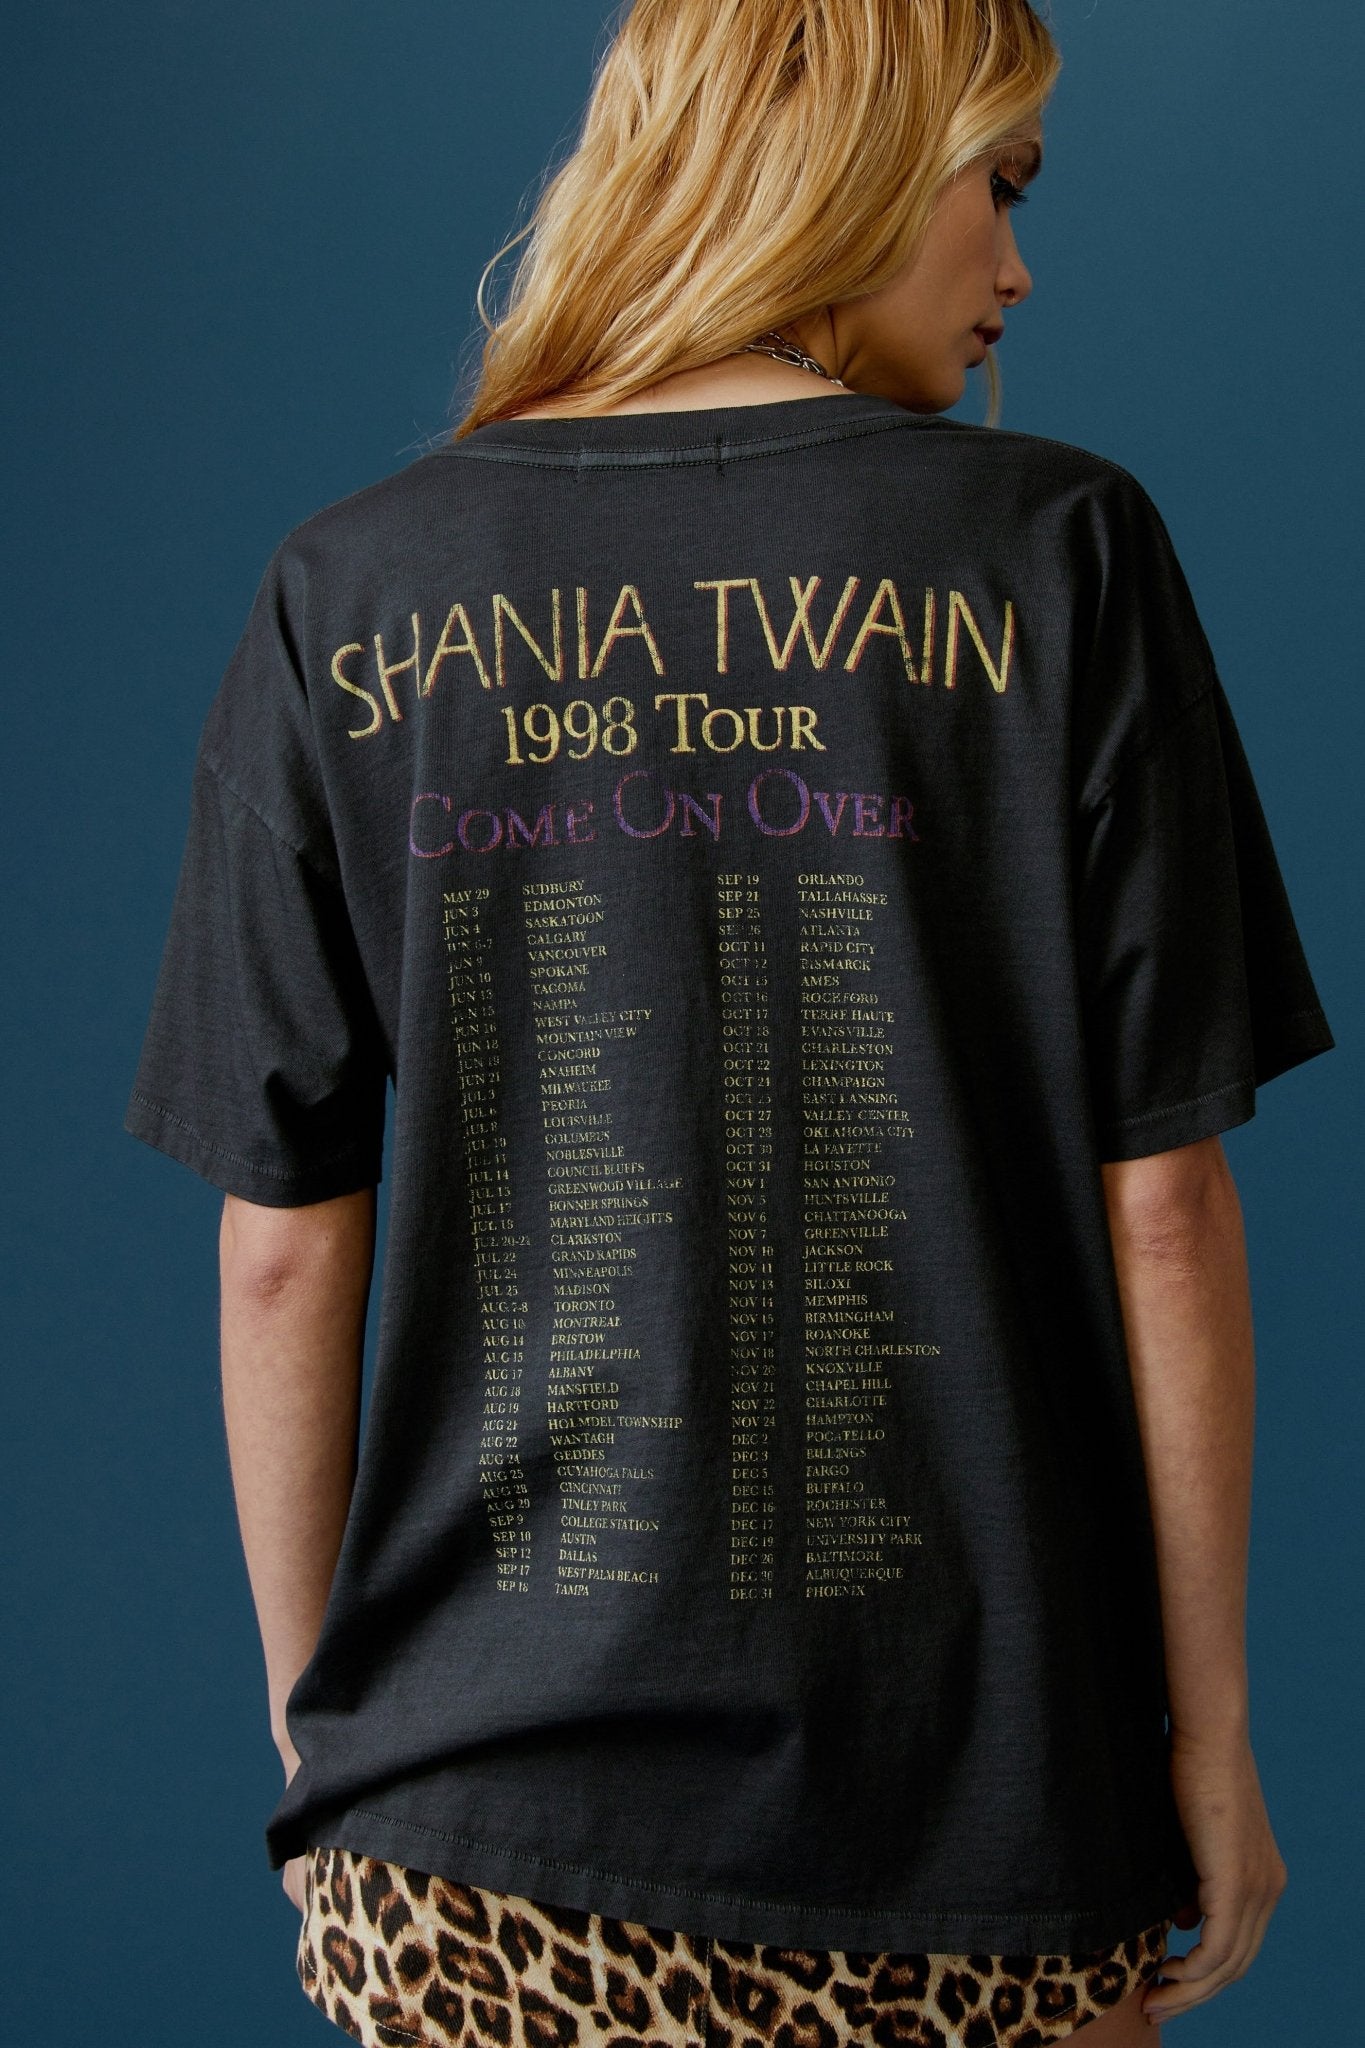 Daydreamer T-shirt | Shania Twain| Come On Over | Merch Tee - Women's Shirts & Tops - Blooming Daily